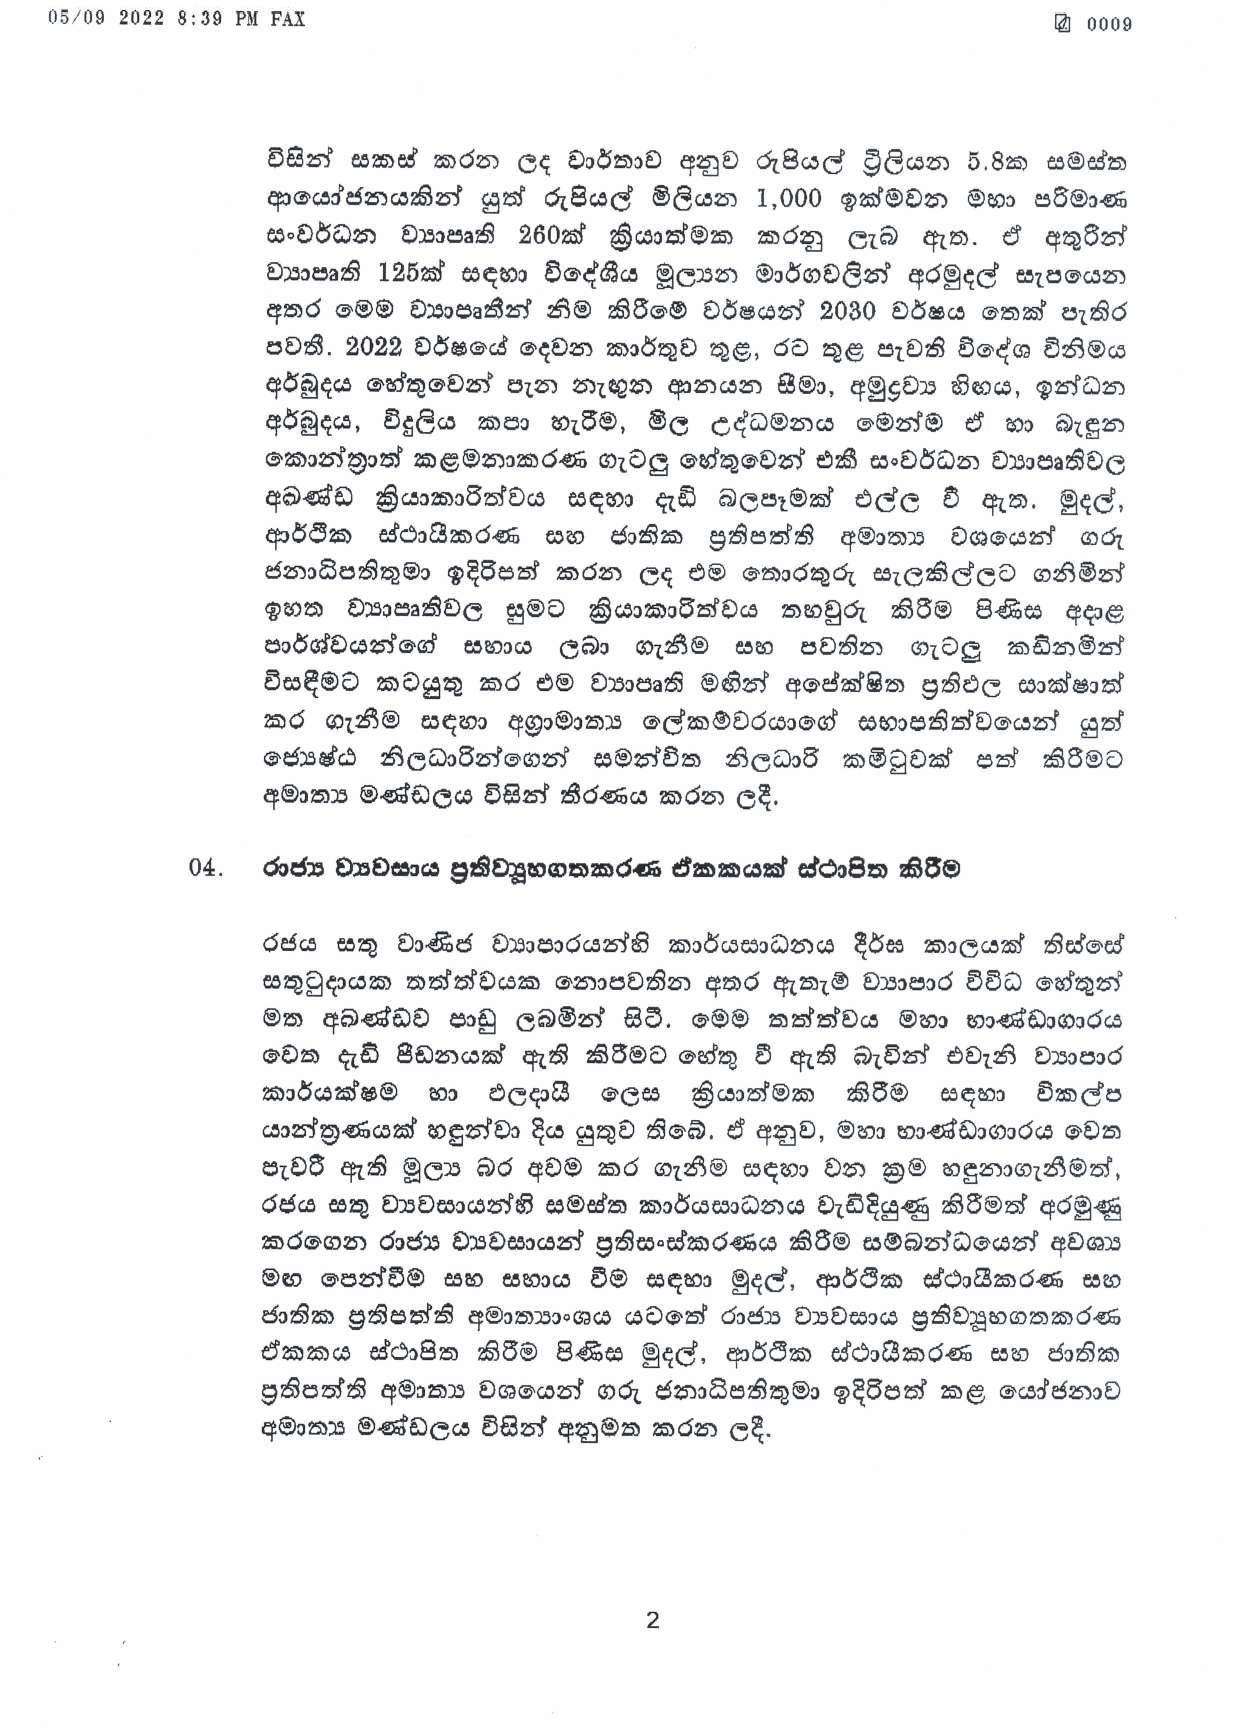 Cabinet Decision on 05.09.2022 page 002